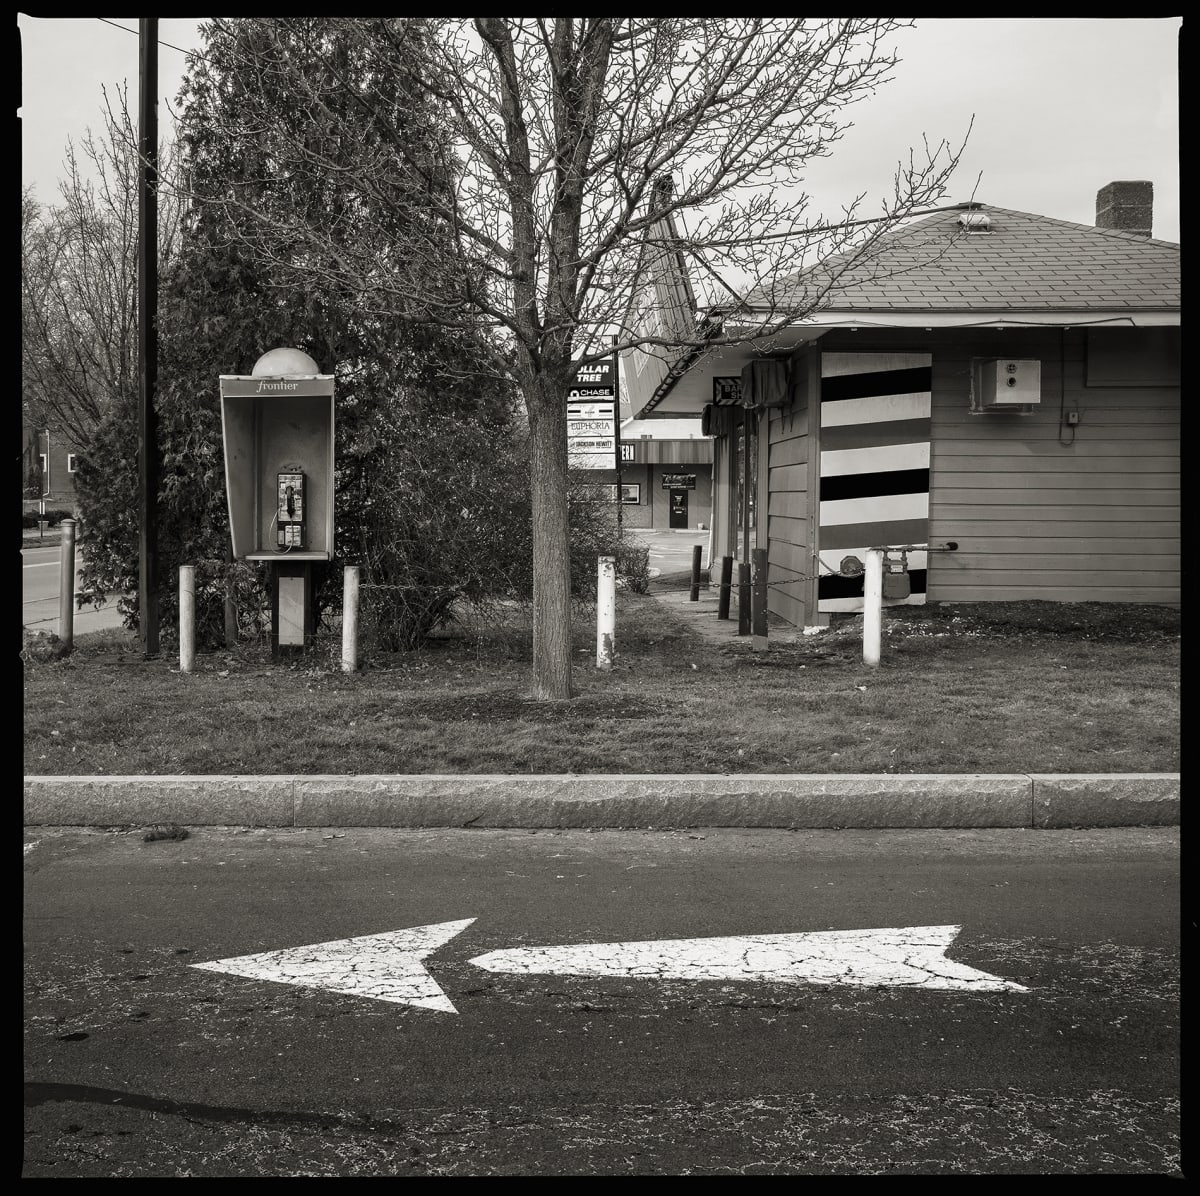 585.288.9518 – 2320 East Main Street, Rochester, NY 14609 by Eric T. Kunsman  Image: ID: A black and white image shows a white arrow in the road pointing left.  Behind the head of the arrow in the grass is a payphone and to the right is a building.